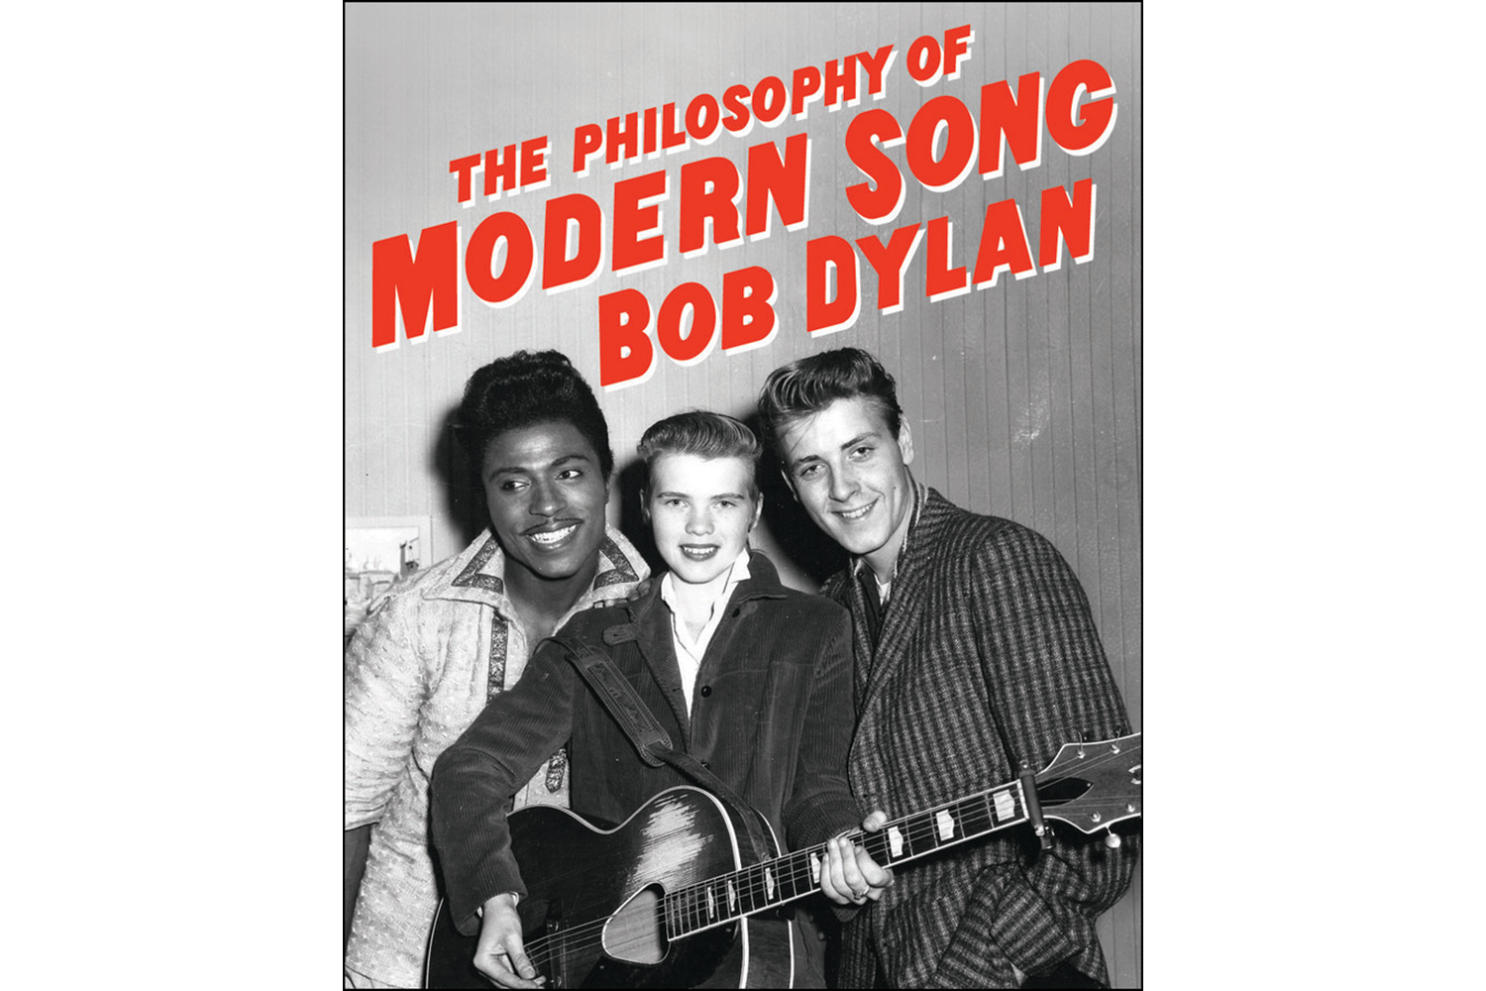 Bob Dylan's latest book, "The Philosophy of Modern Song," released soon_40.1